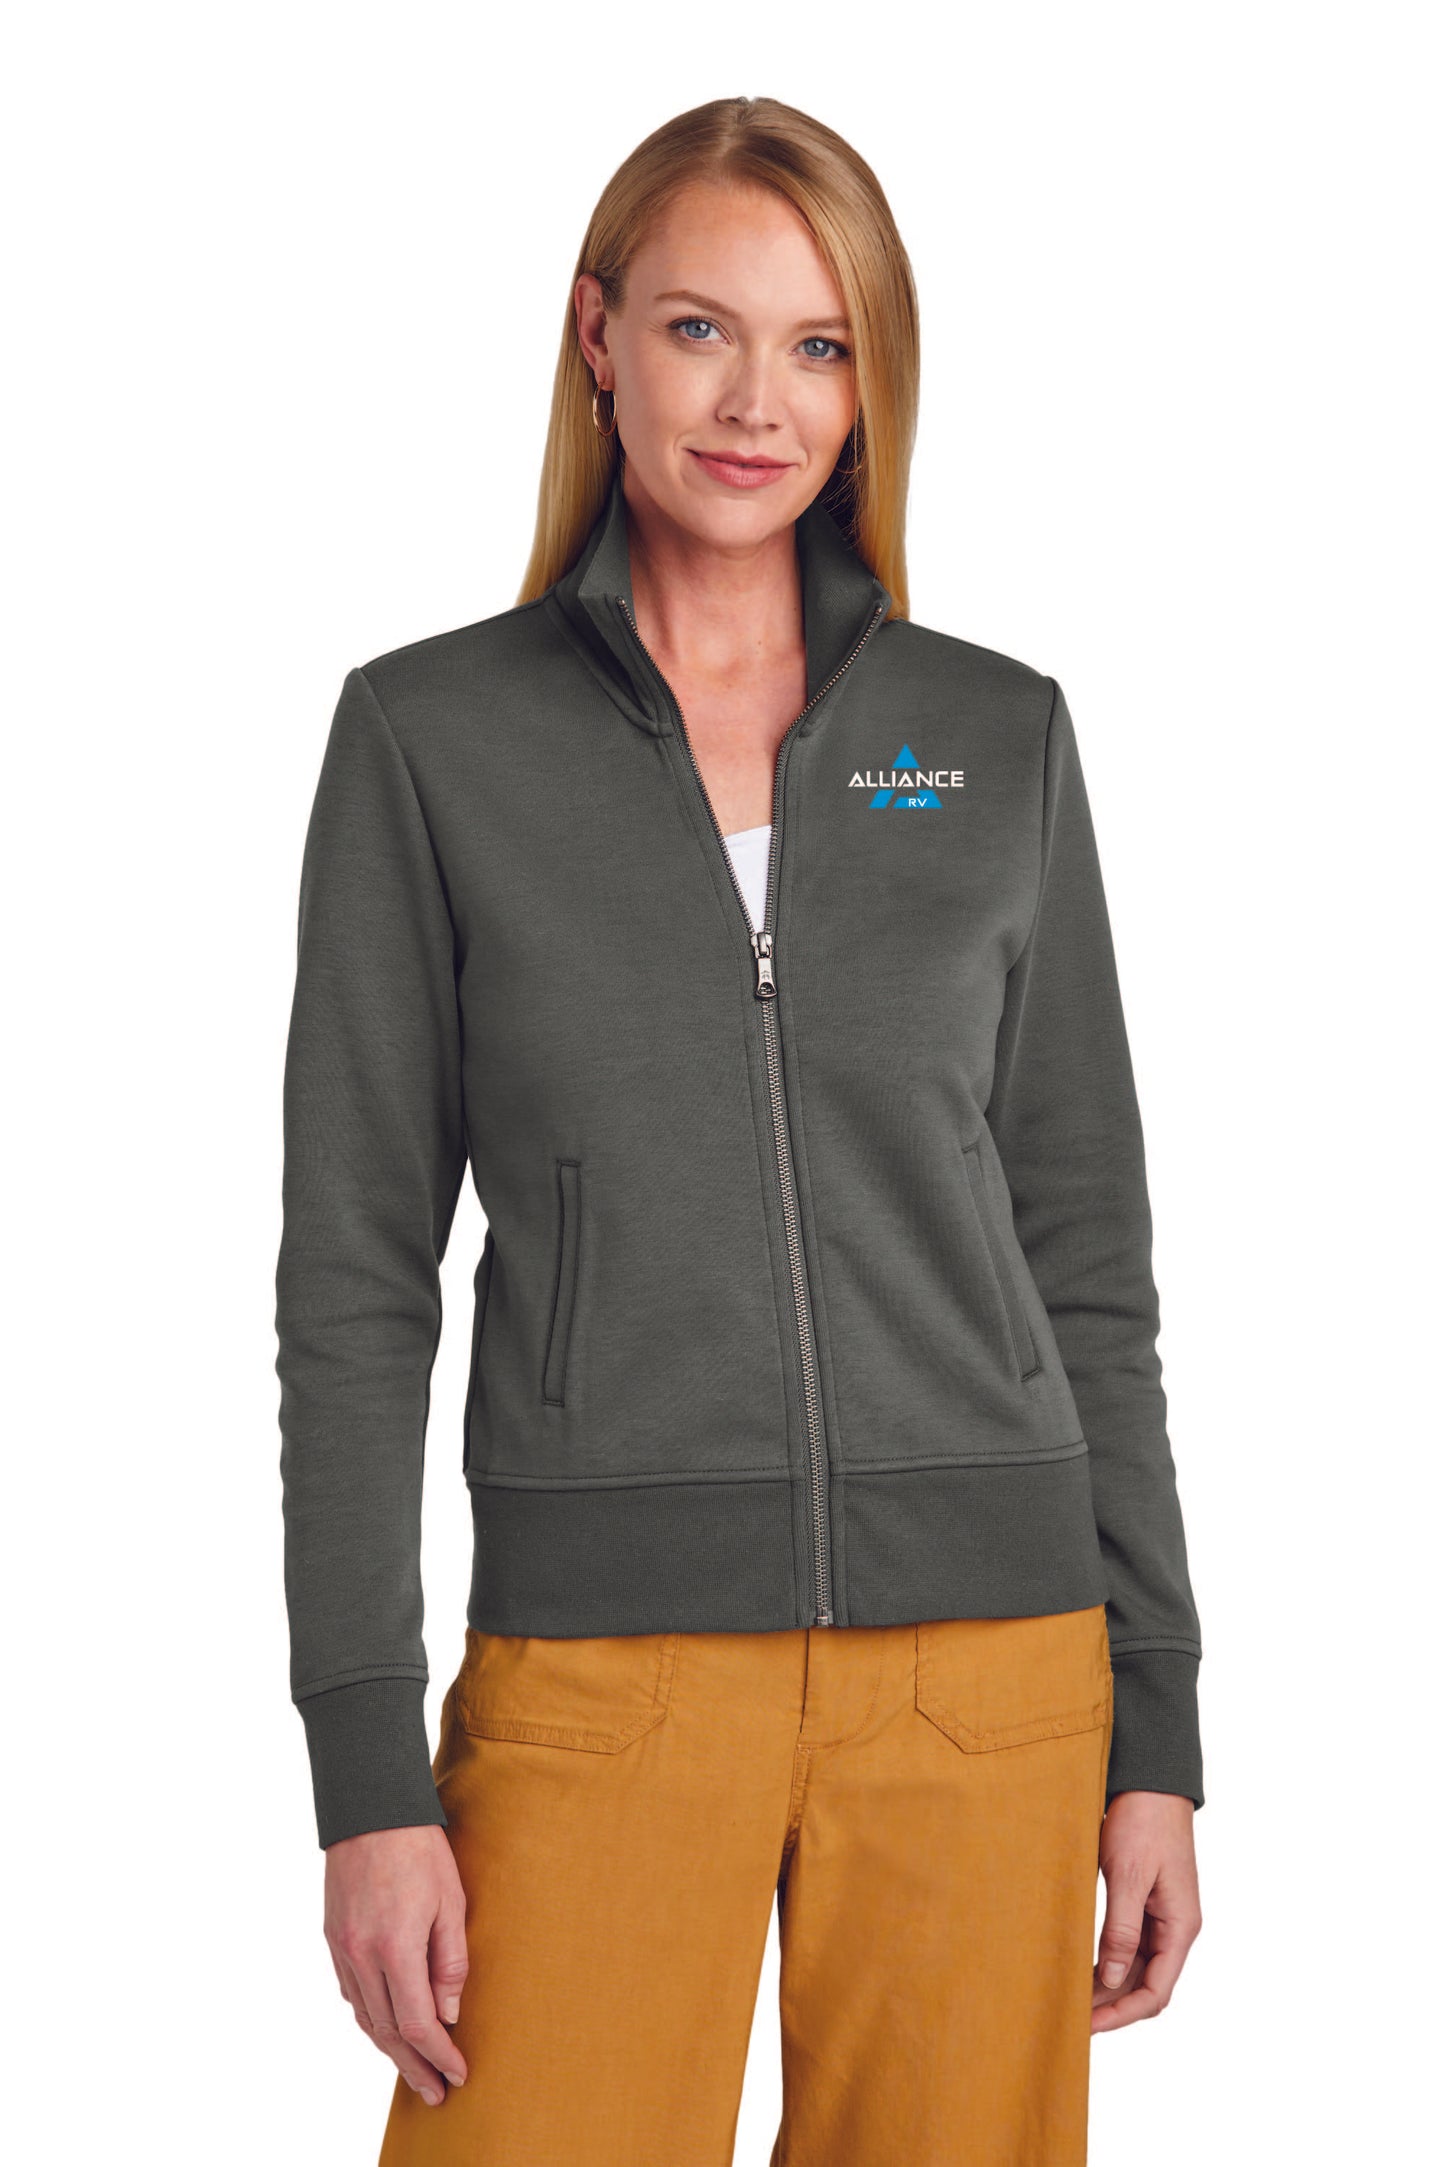 Brooks Brothers® Women’s Double-Knit Full-Zip - BB18211